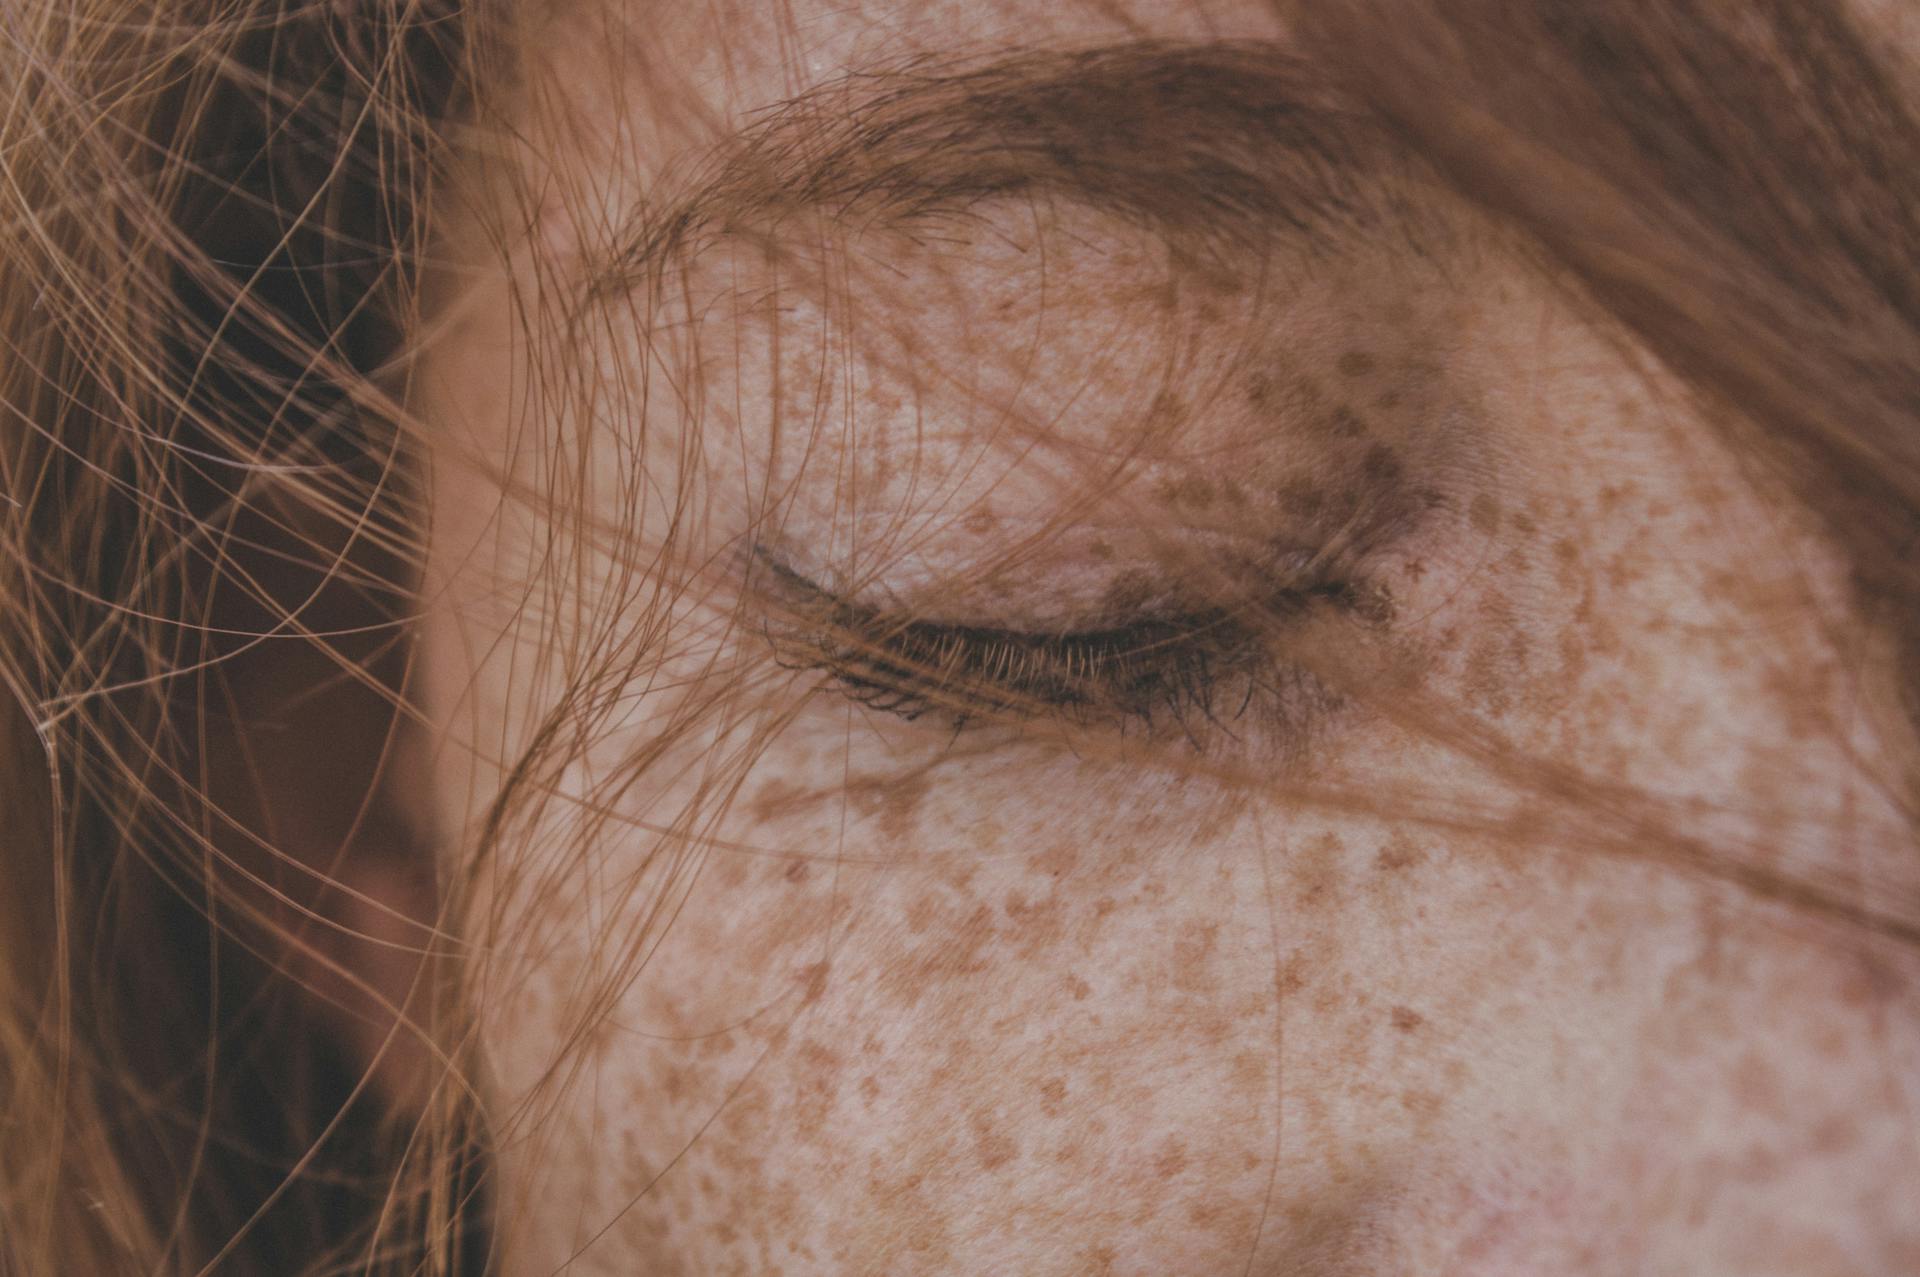 A close-up of a woman's freckles | Source: Pexels